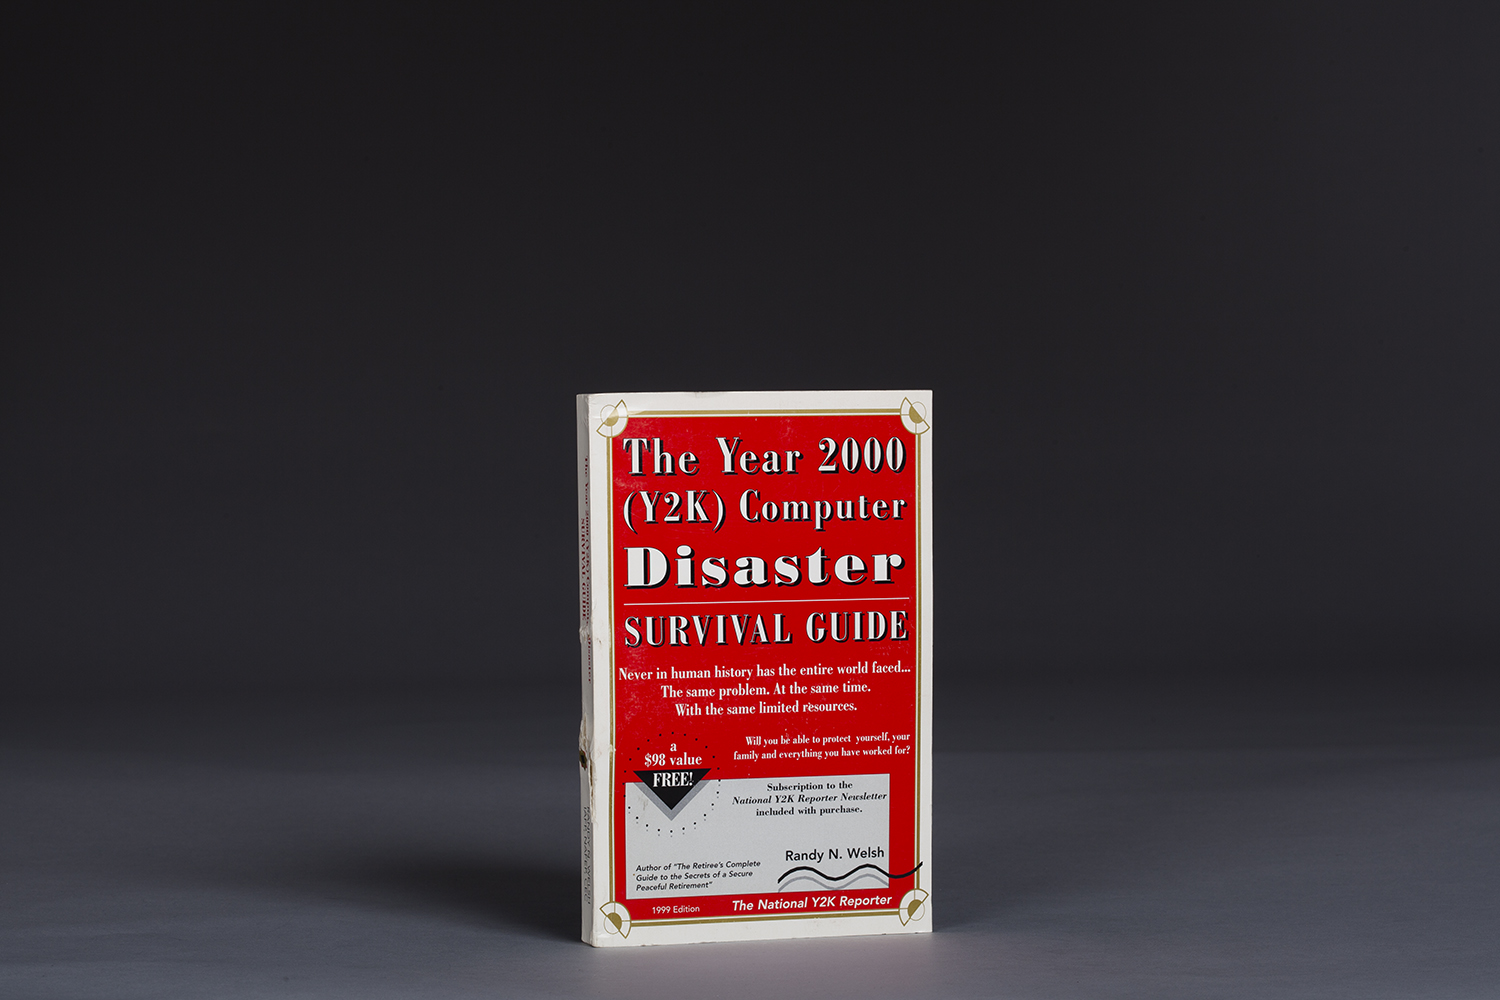 The Year 2000 (Y2K) Computer Disaster Survival Guide - 0320 Cover.jpg